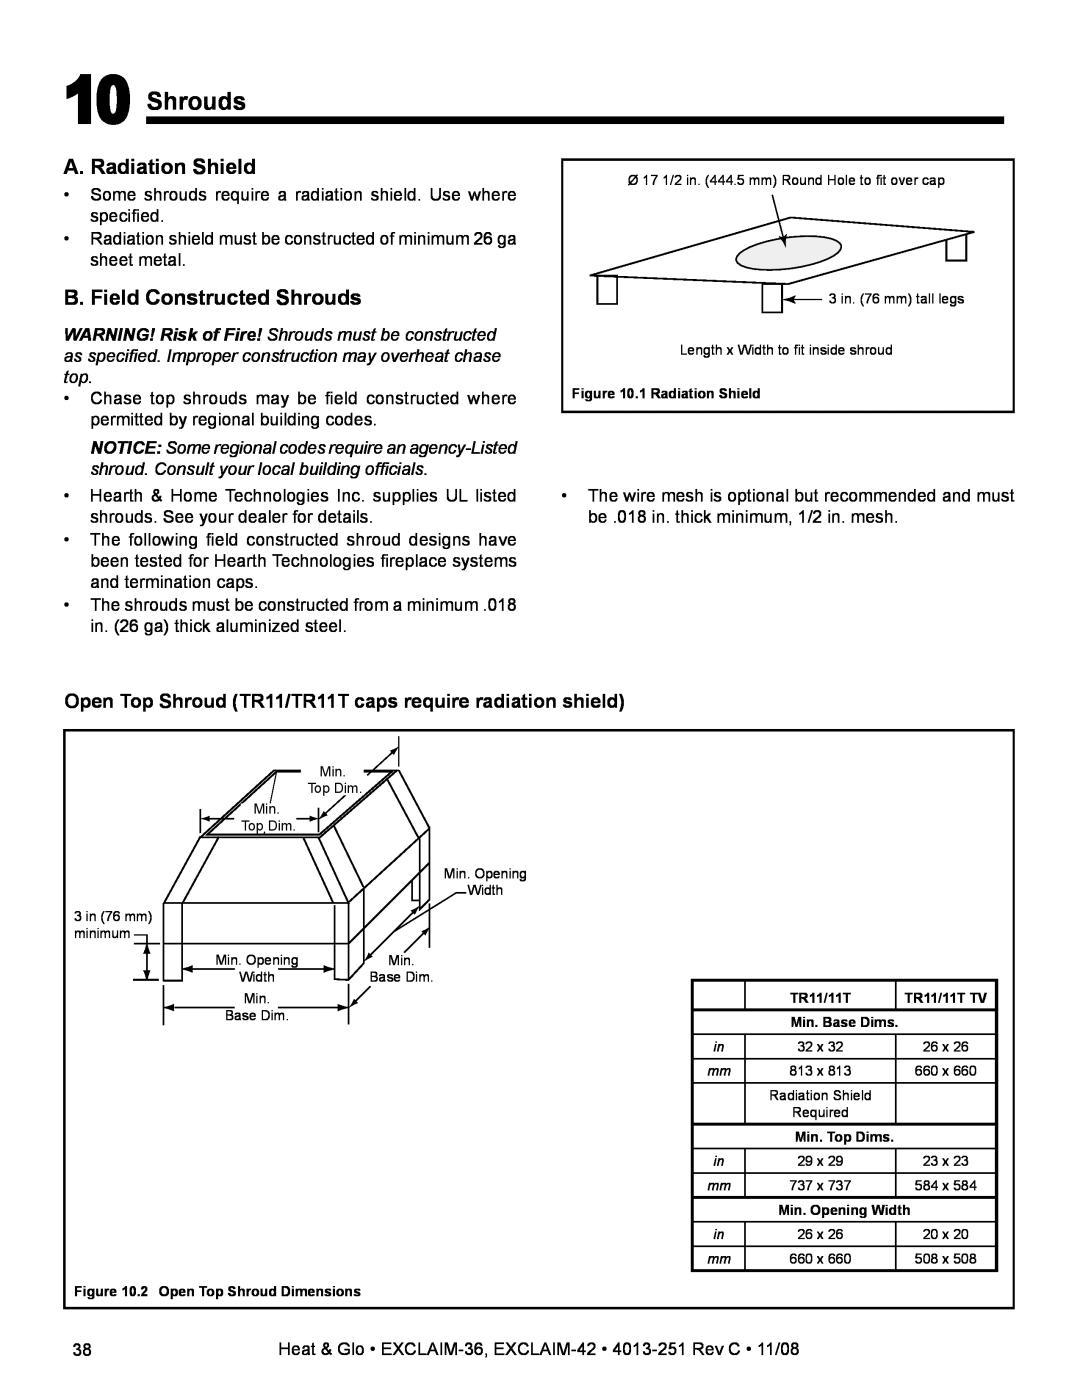 Hearth and Home Technologies EXCLAIM-36 owner manual A. Radiation Shield, B. Field Constructed Shrouds 